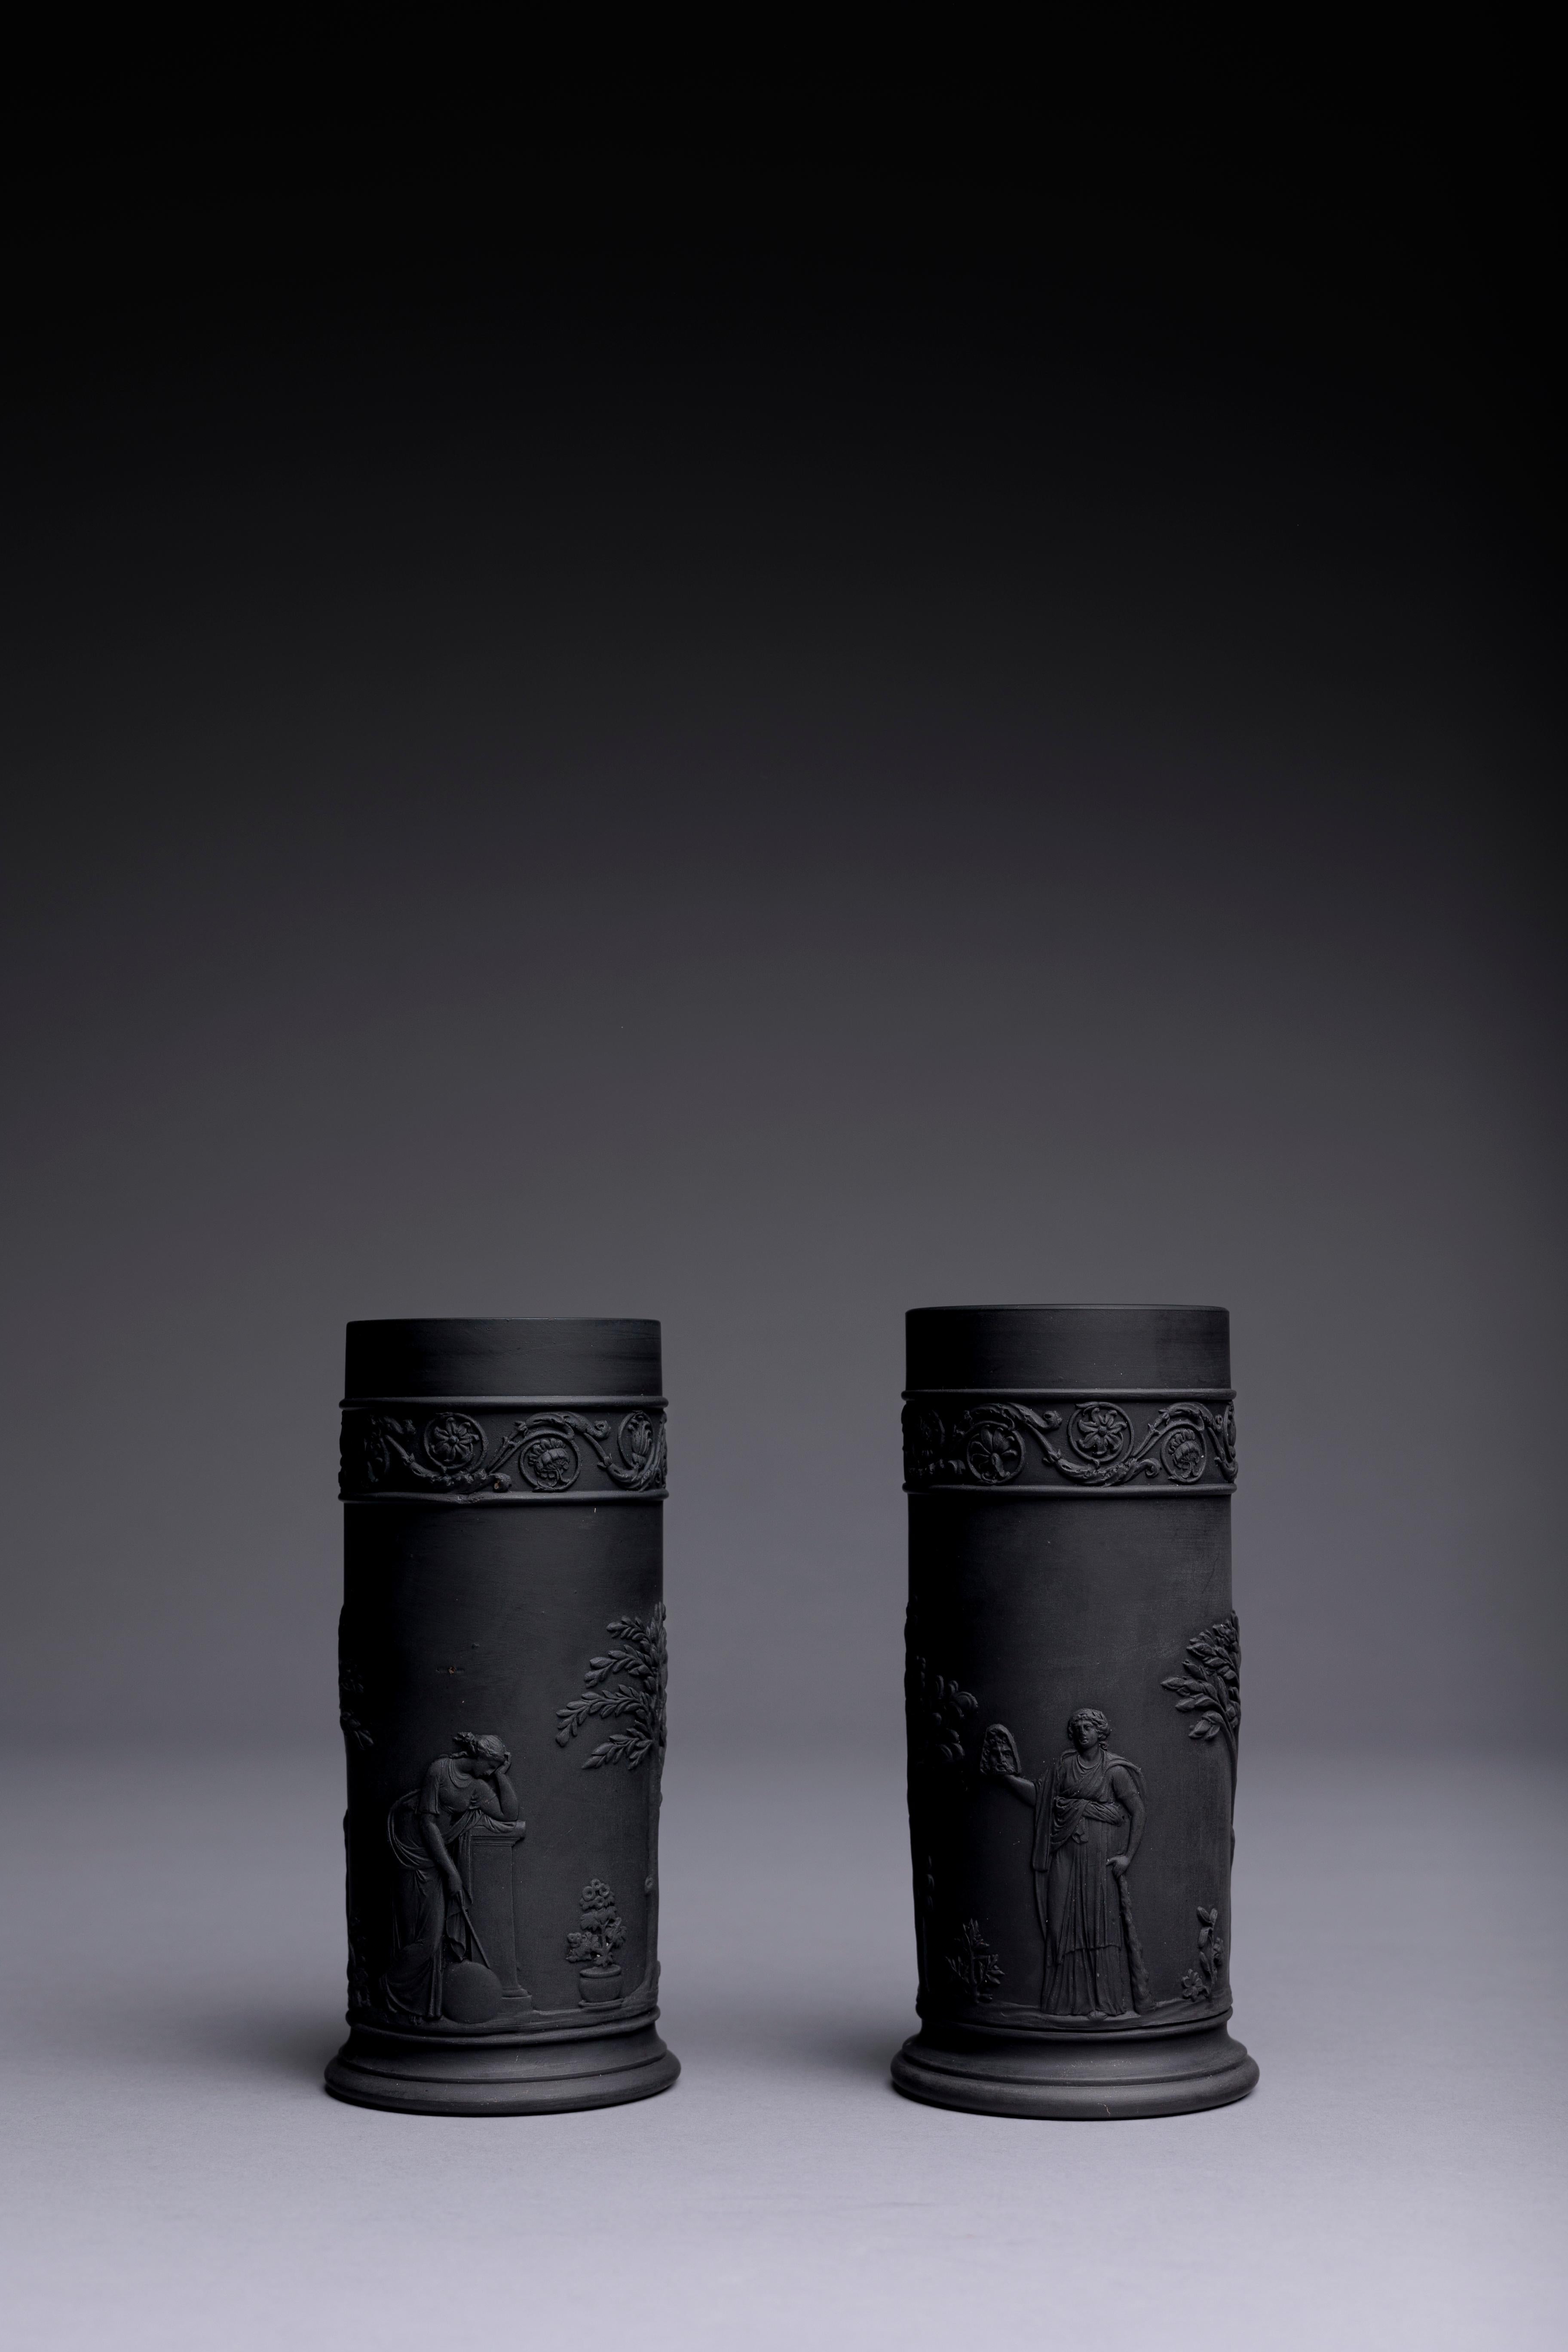 A pair of Neoclassical black basalt spill vases by Wedgwood, made circa 1820.

The vases are accented with a delicate border of scrolling acanthus leaves and depict excerpts from John Flaxman’s Apollo and the Muses. Apollo with his lyre; Thalia,